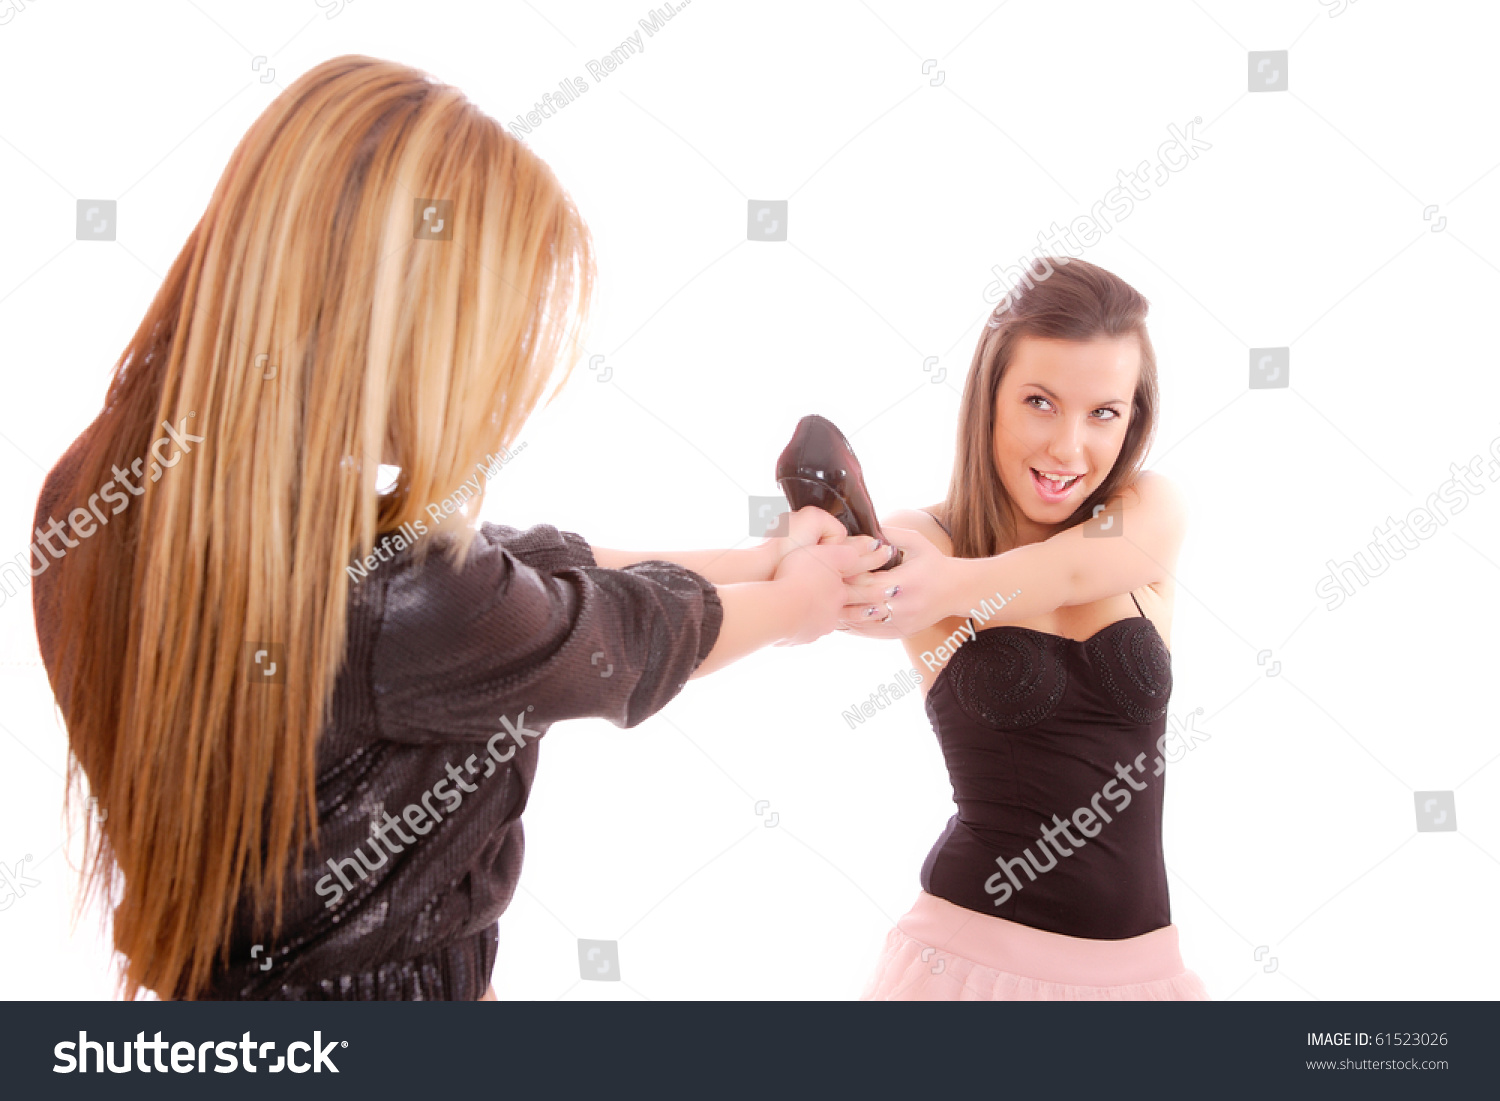 Two Young Woman Fighting For A Shoe Over A White Background Stock Photo